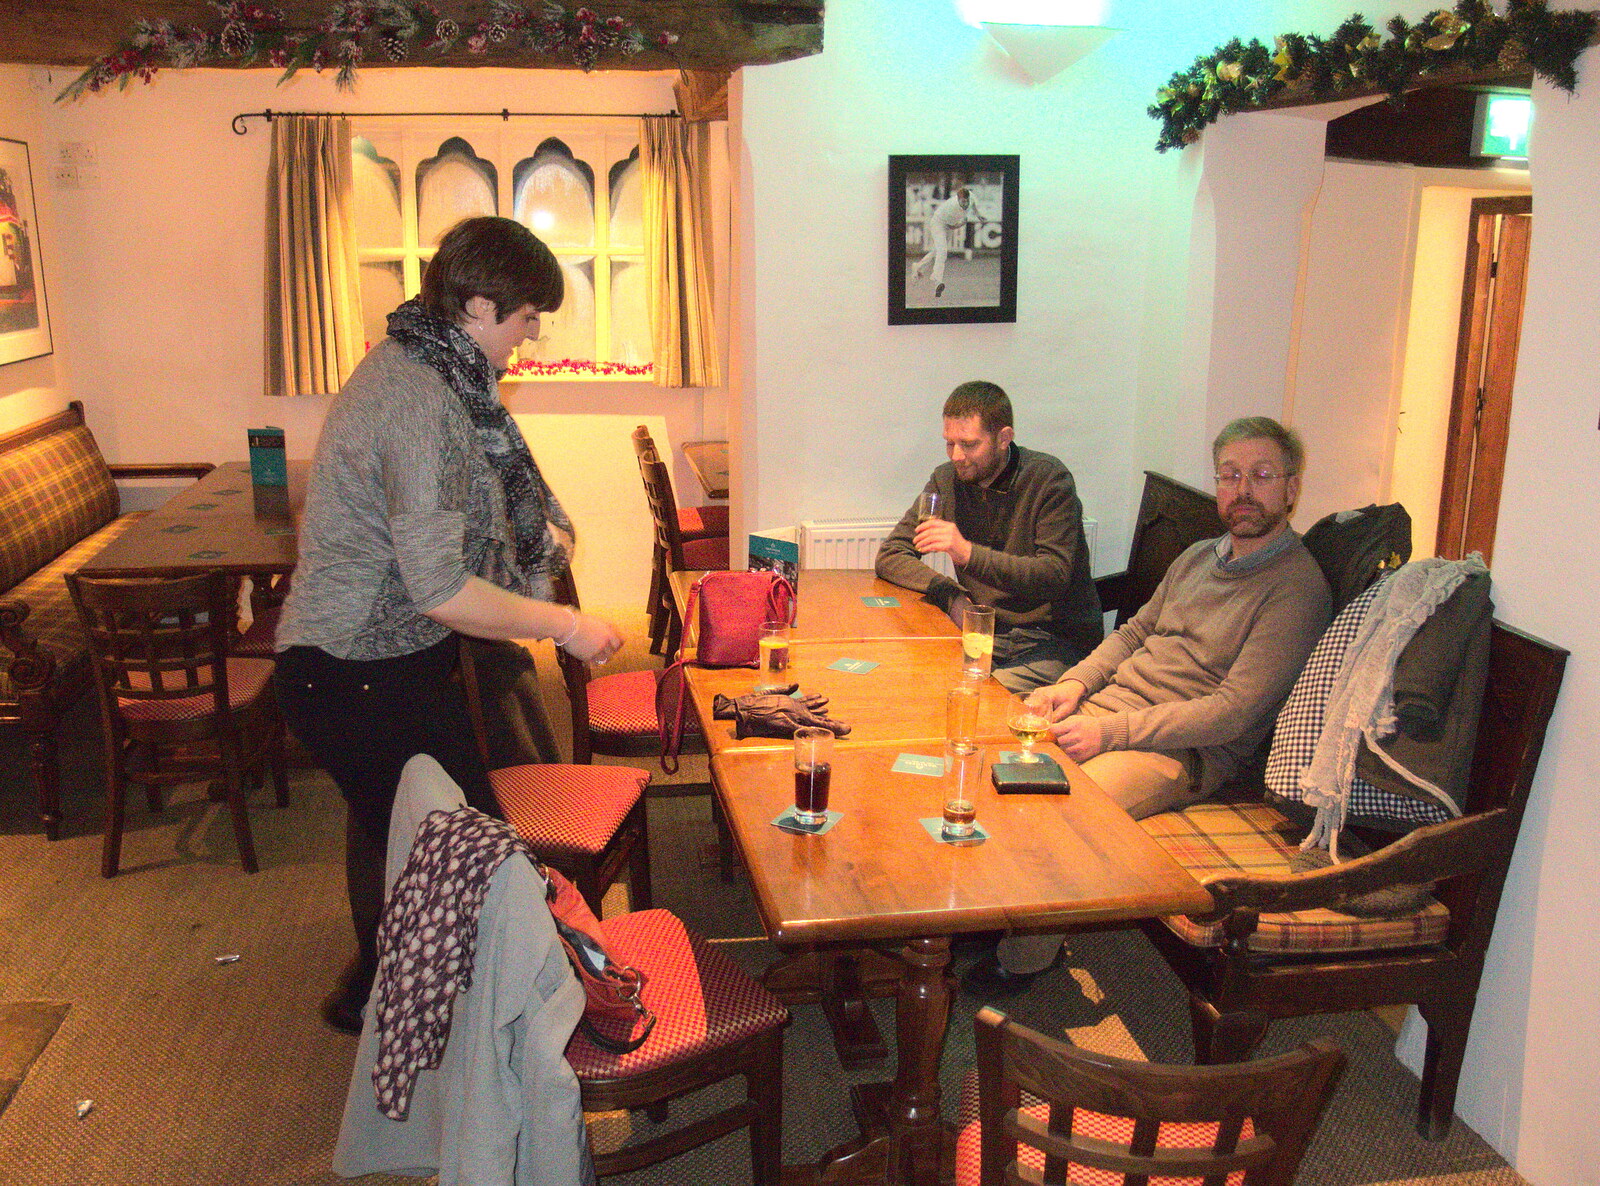 Marc looks up as Sarah sits down from New Year's Eve at the Oaksmere, Brome, Suffolk - 31st December 2014